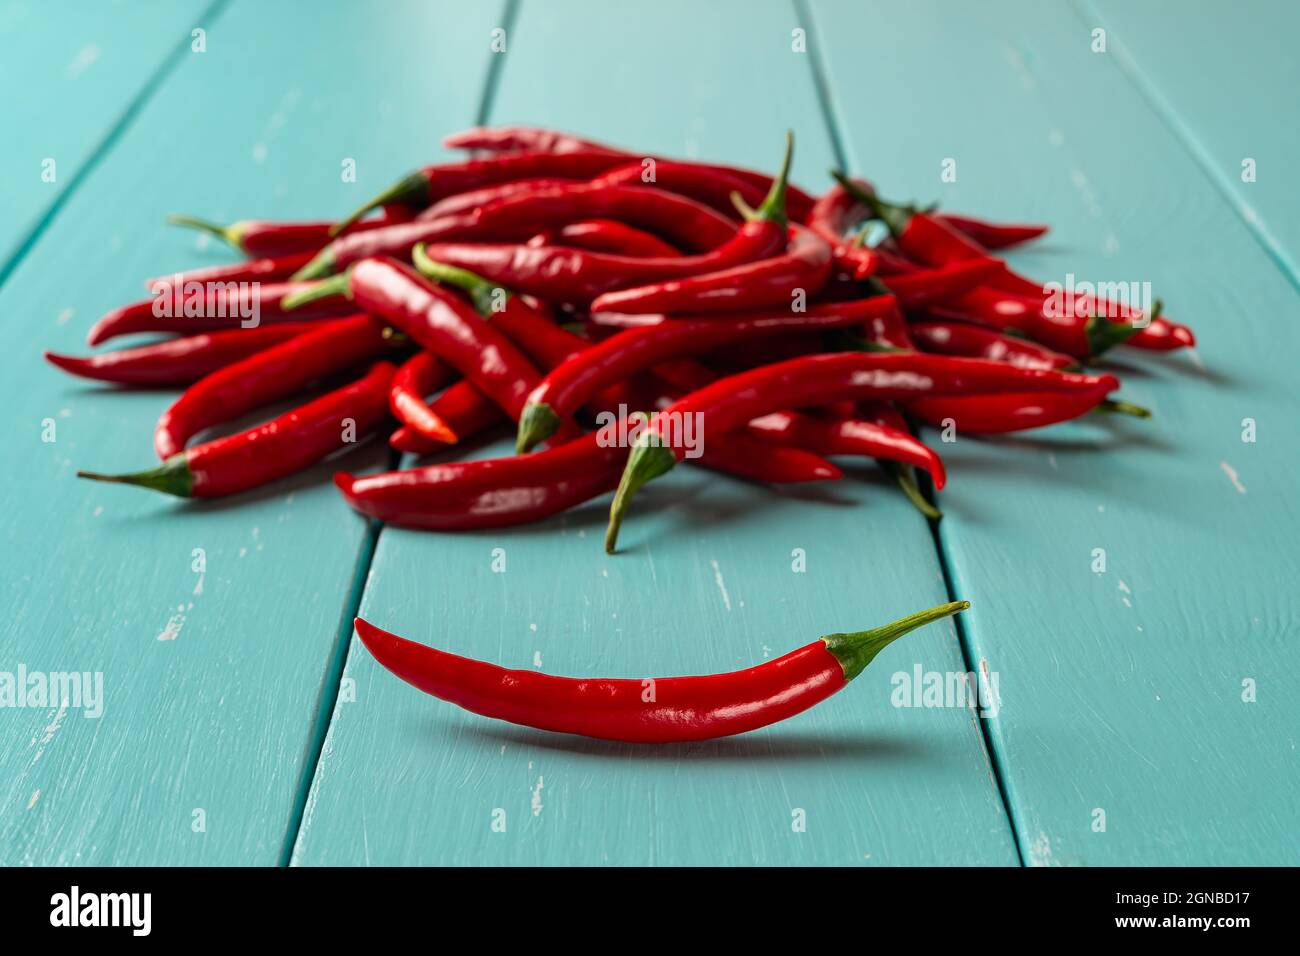 https://c8.alamy.com/comp/2GNBD17/red-hot-chili-pepper-pod-in-front-of-raw-chilli-peppers-pile-over-turquoise-wooden-table-whole-fresh-pungent-chiles-for-cooking-spicy-dishes-2GNBD17.jpg